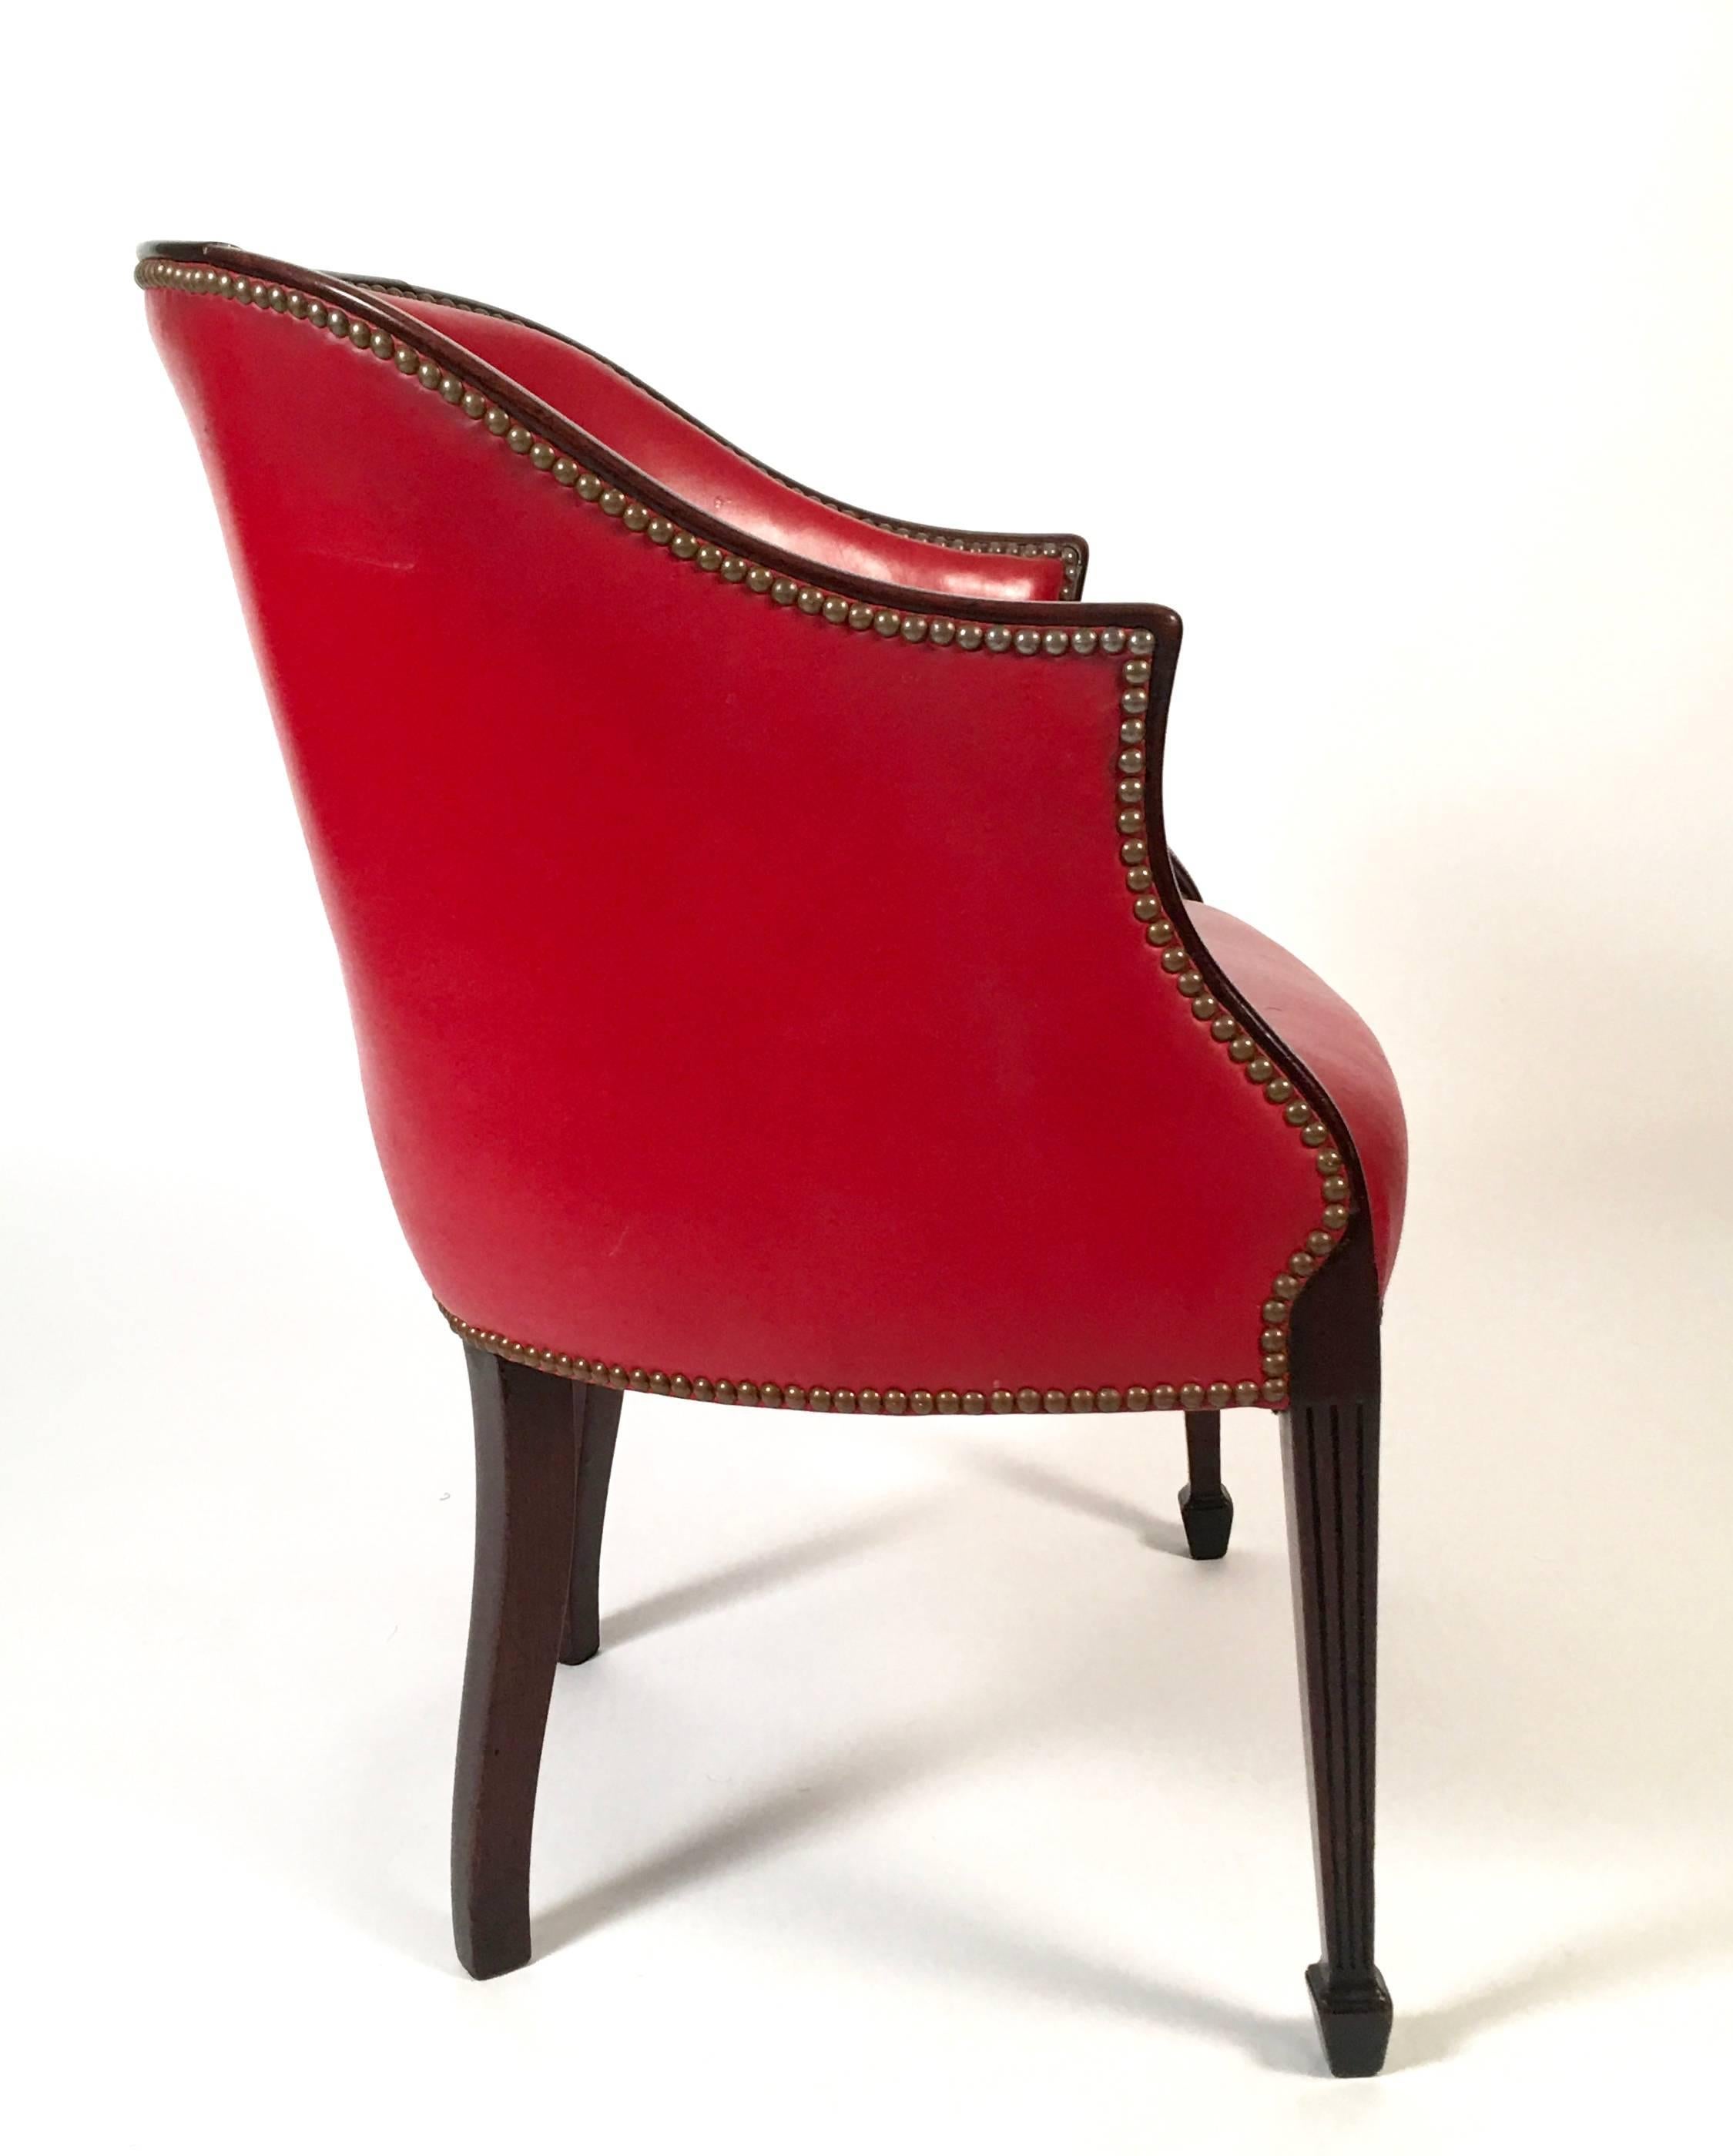 Great Britain (UK) Hepplewhite Red Leather Barrel Back Armchair